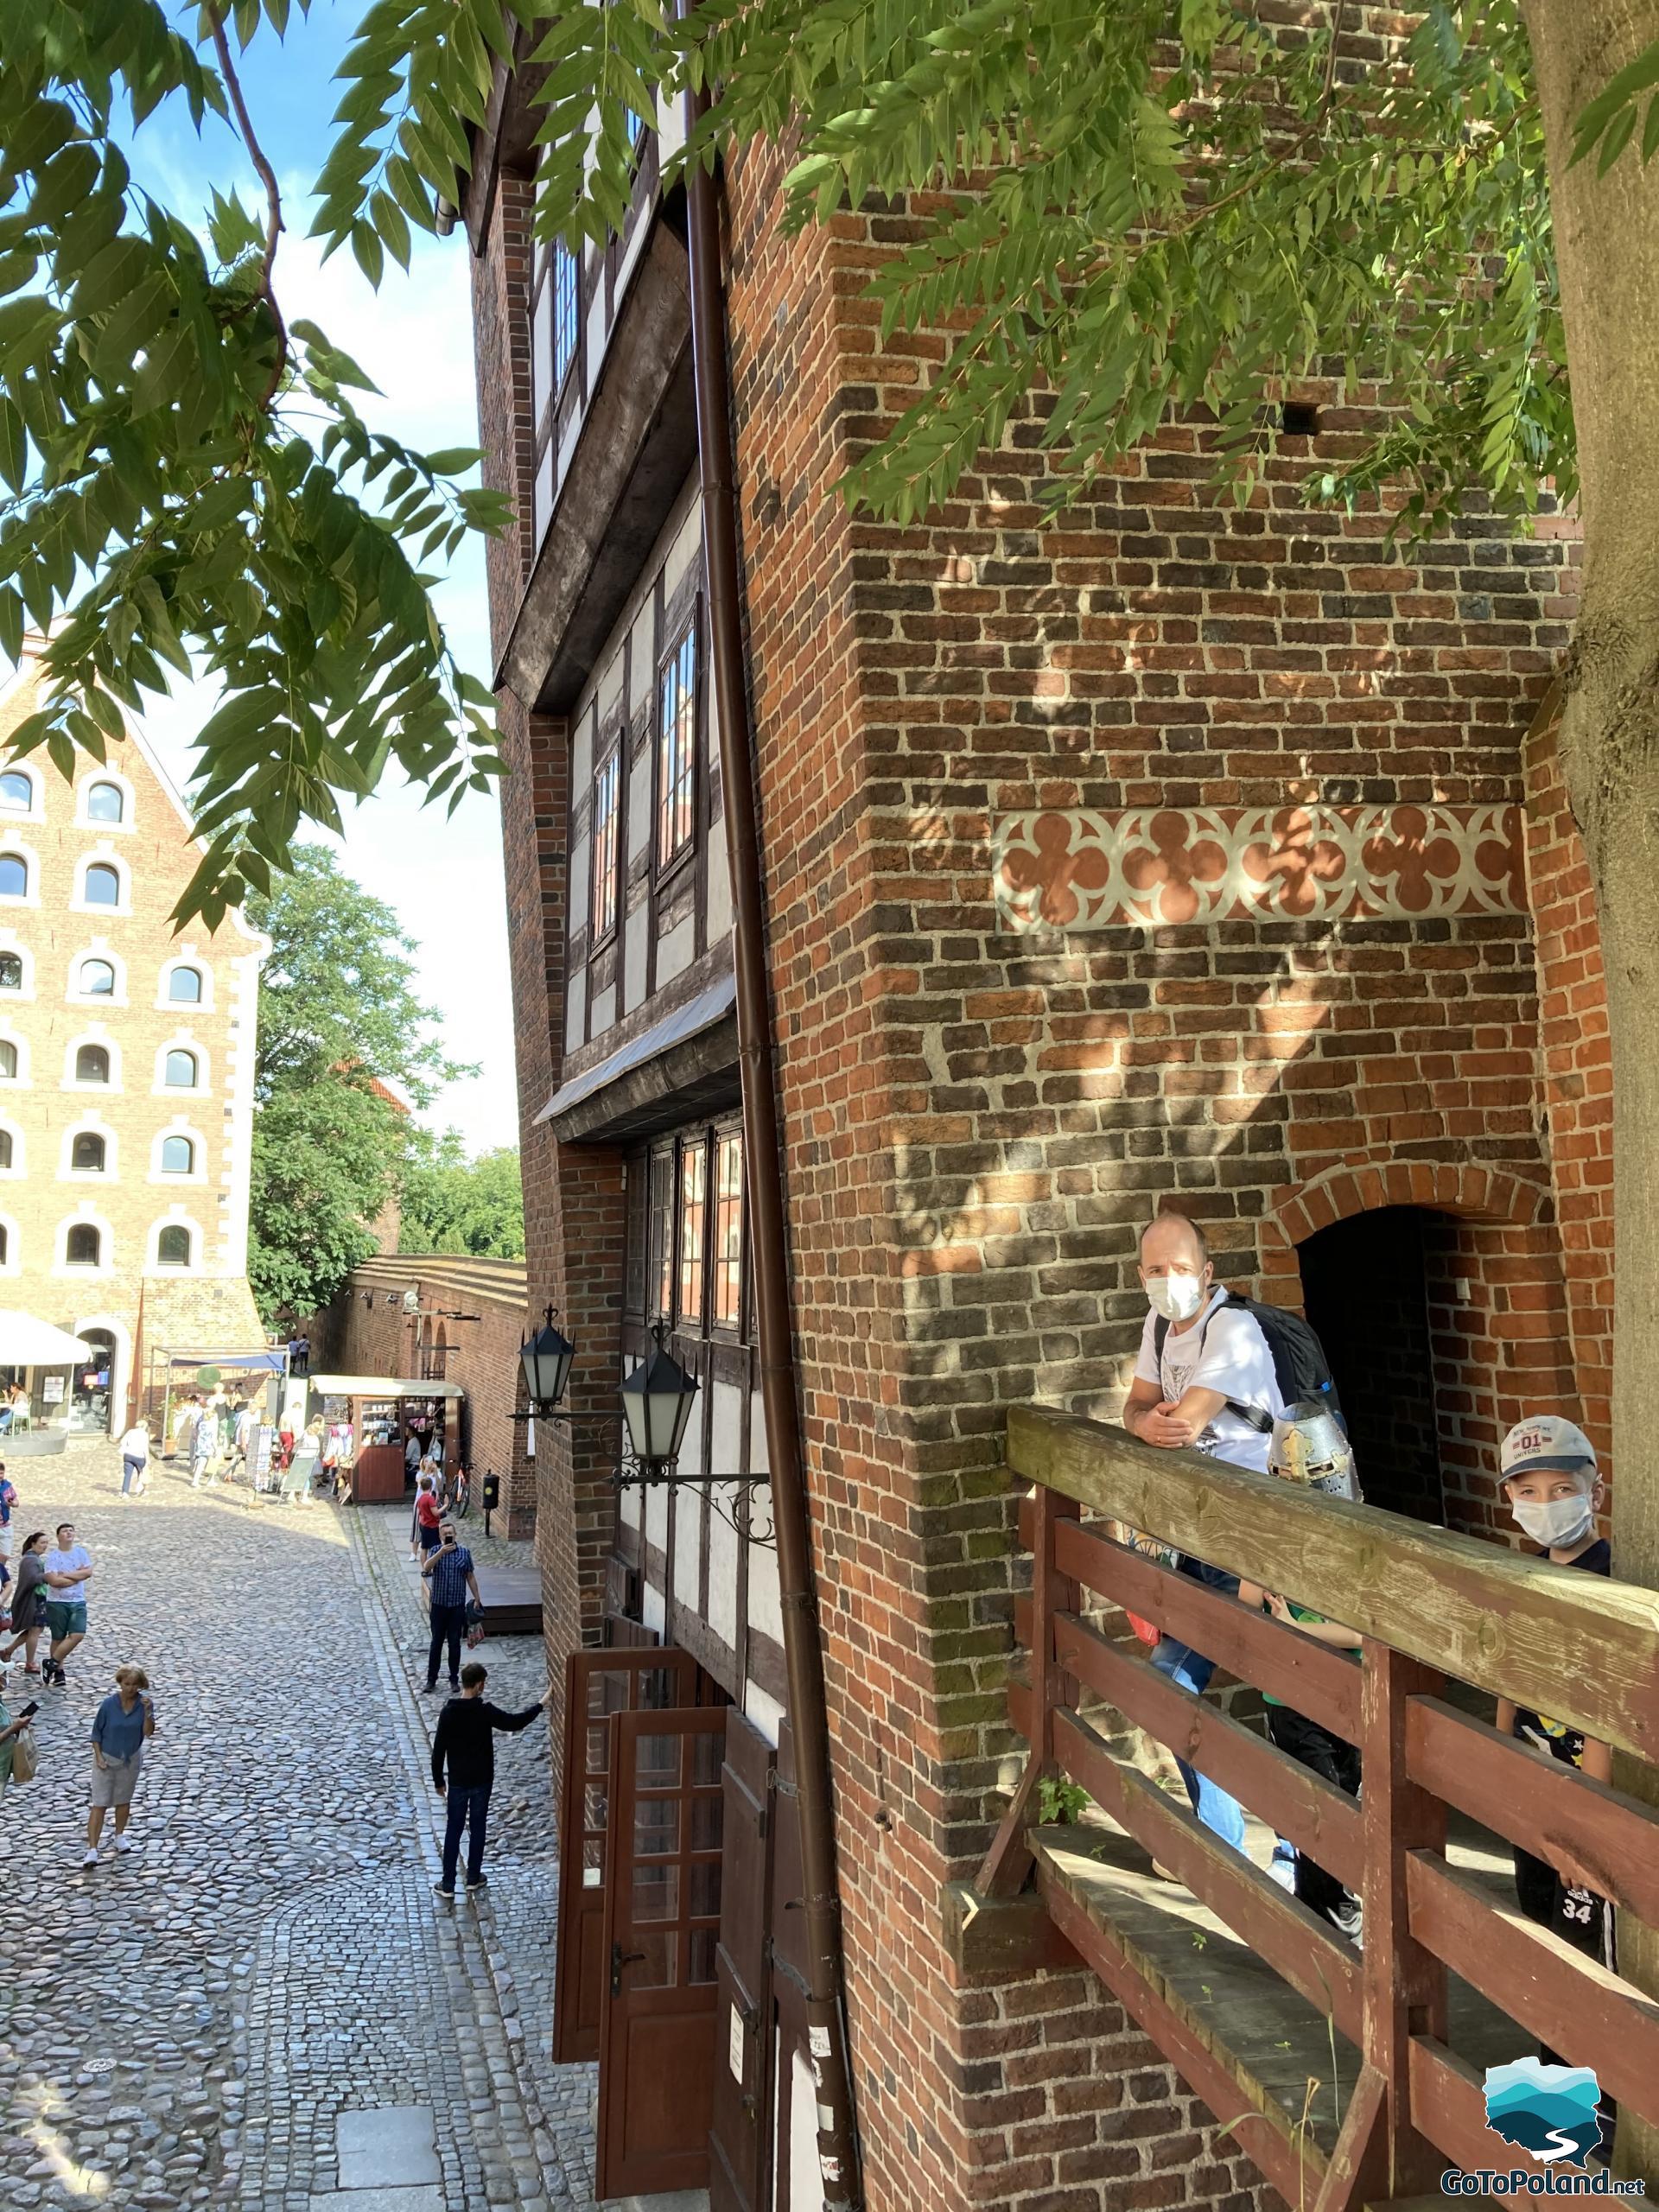 a man and two children are on a balcony that leads to a brick tower